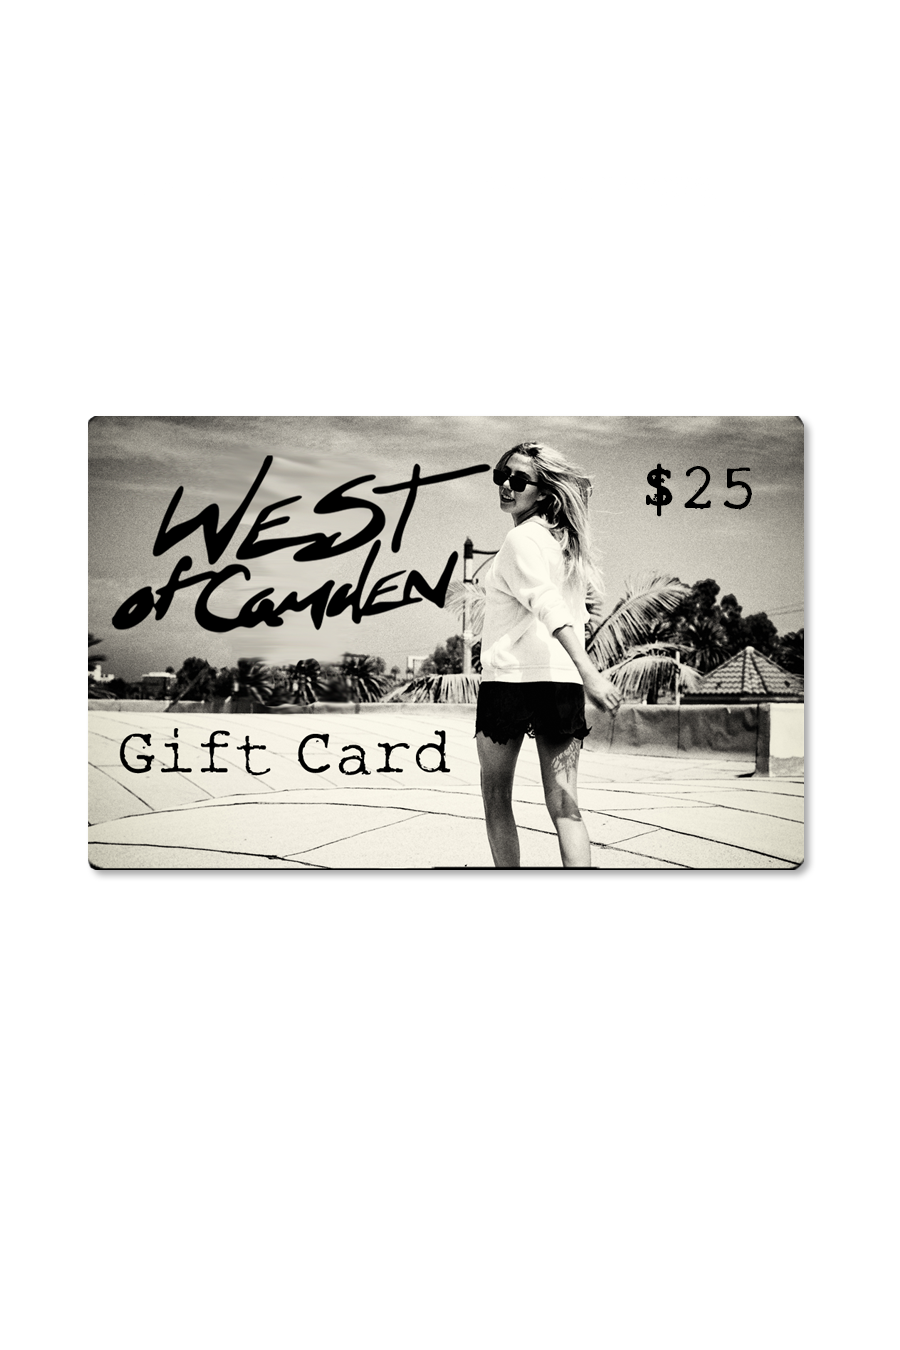 Gift Card - West of Camden - Main Image Number 3 of 5